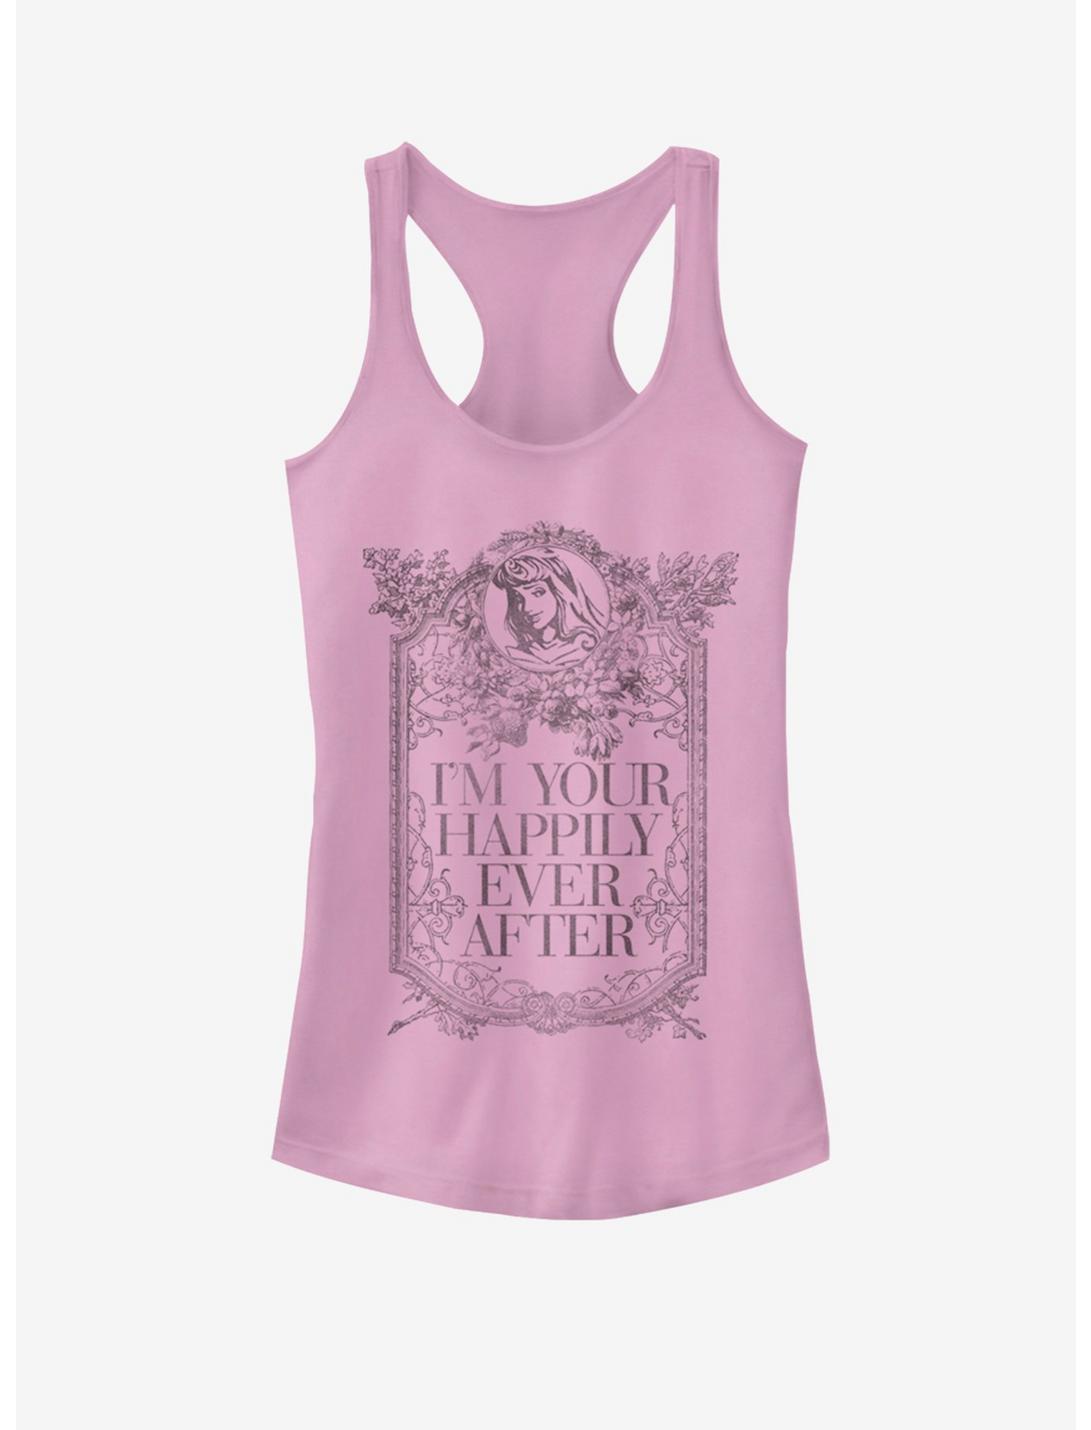 Disney Sleeping Beauty Happily Ever After Girls Tank, LILAC, hi-res